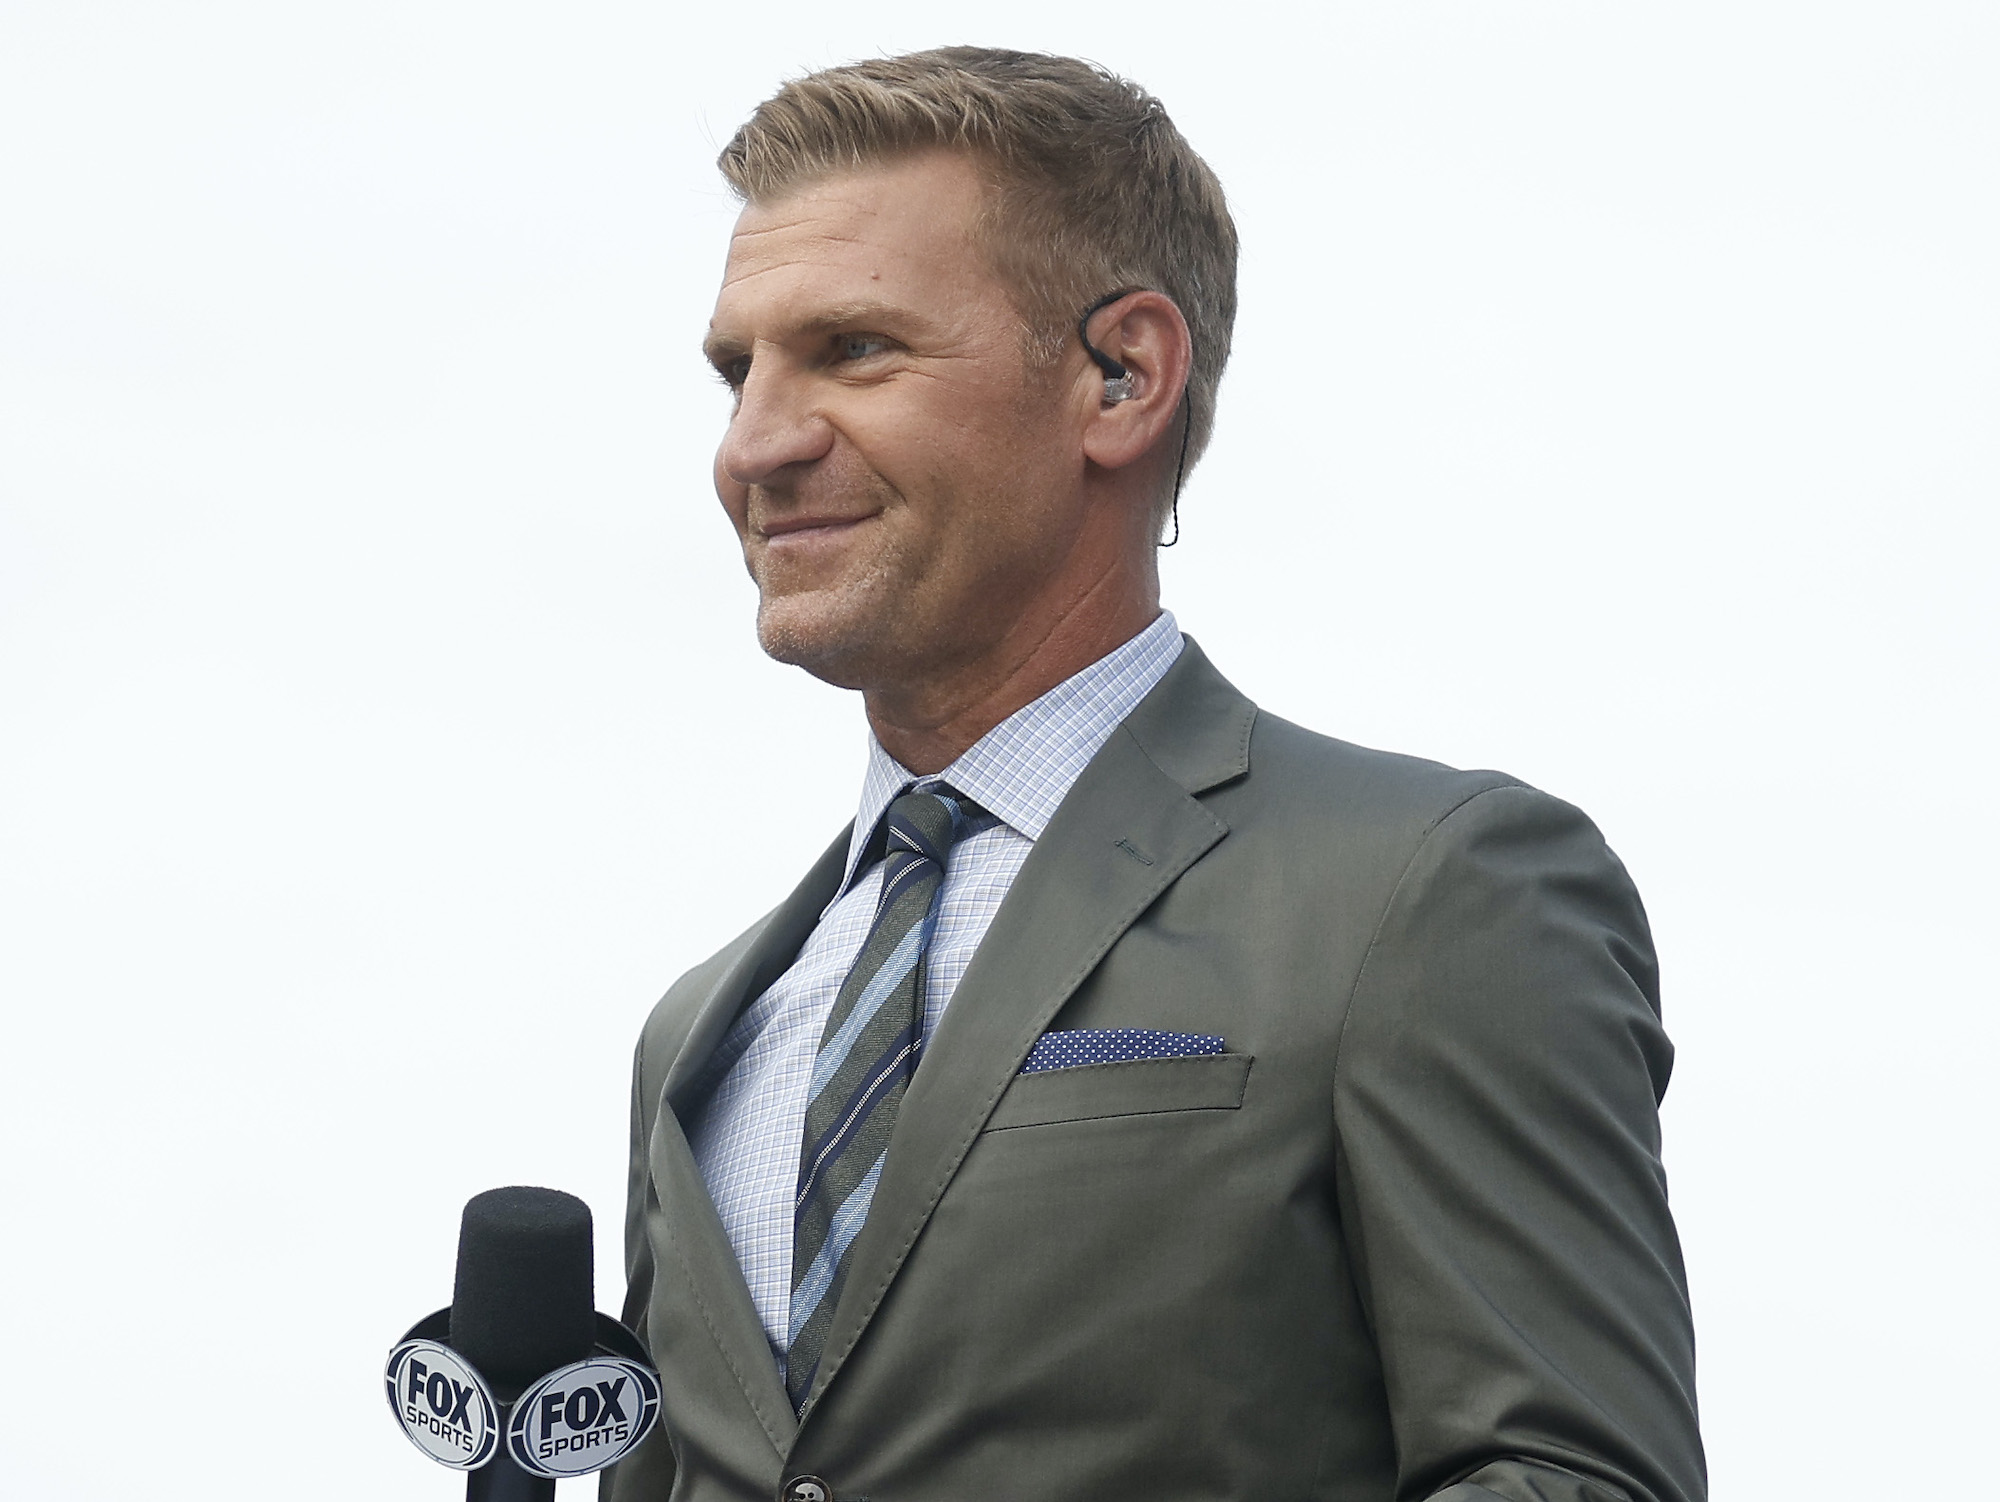 Clint Bowyer Embarrassed During Clash Broadcast by Gwen Stefani, Who Talked About Time He Was ‘Wasted’ and Made a Confession